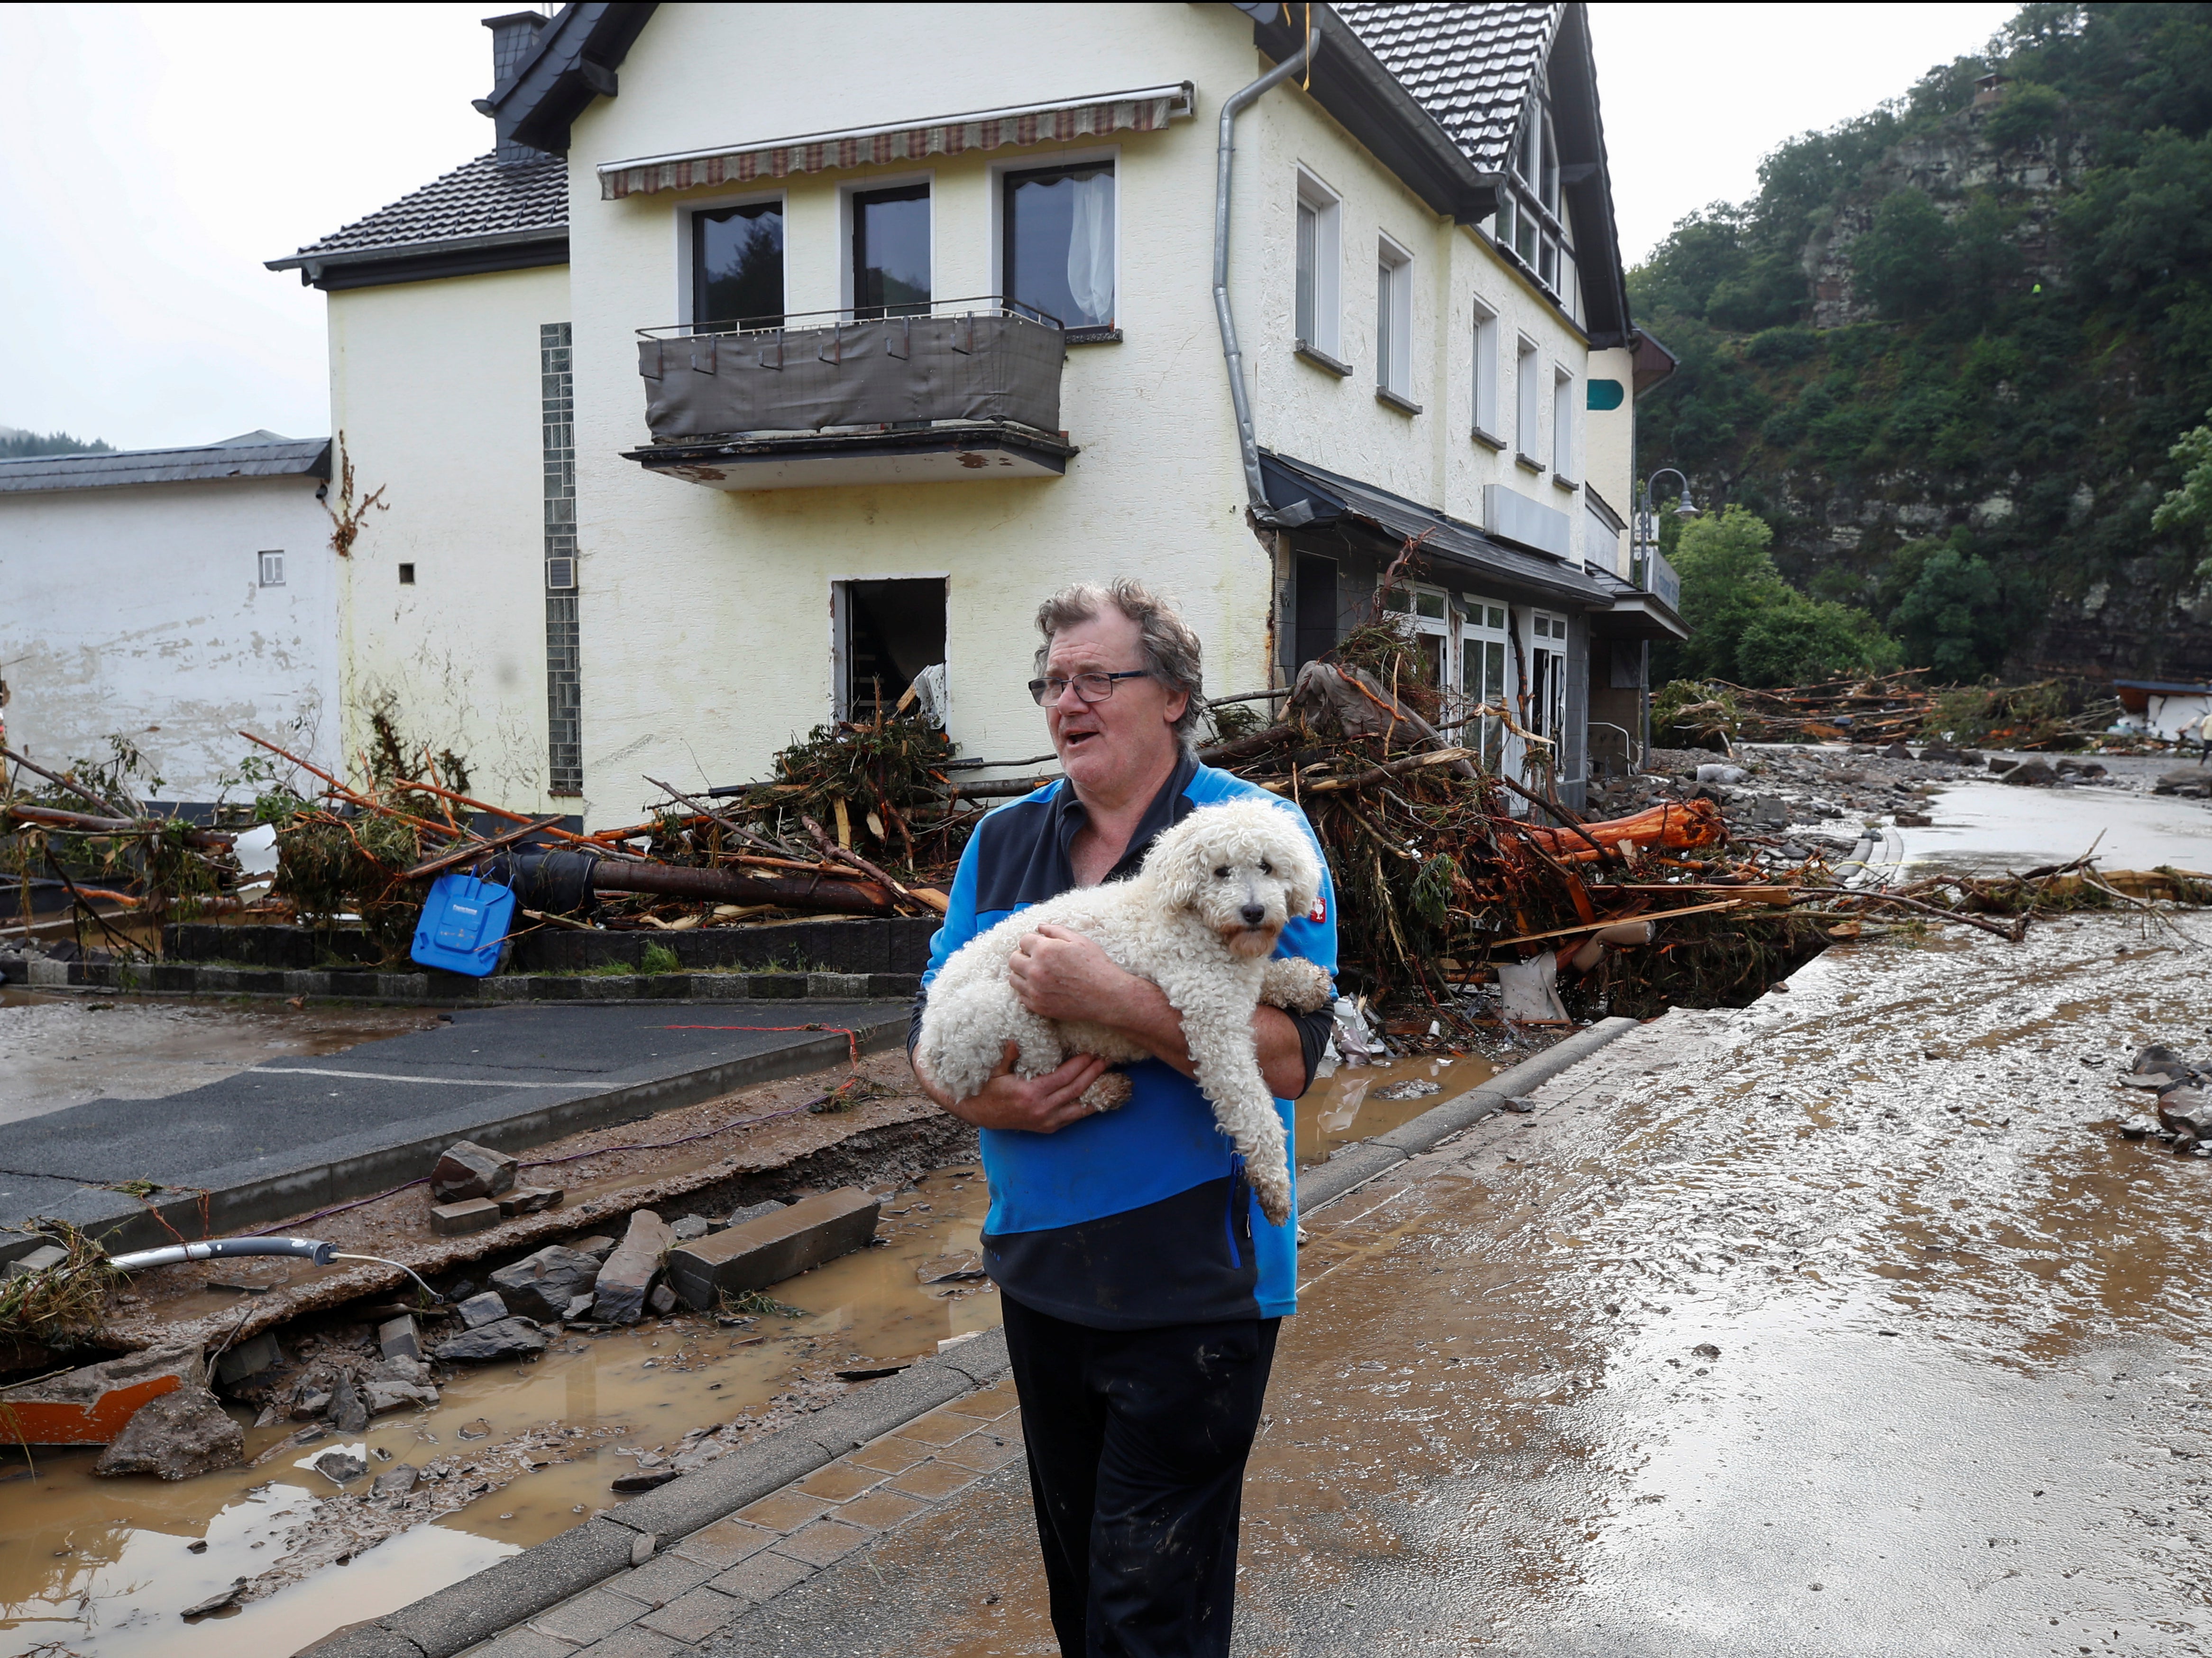 A man carries a dog through the debris brought on by the flooding in Schuld, Germany